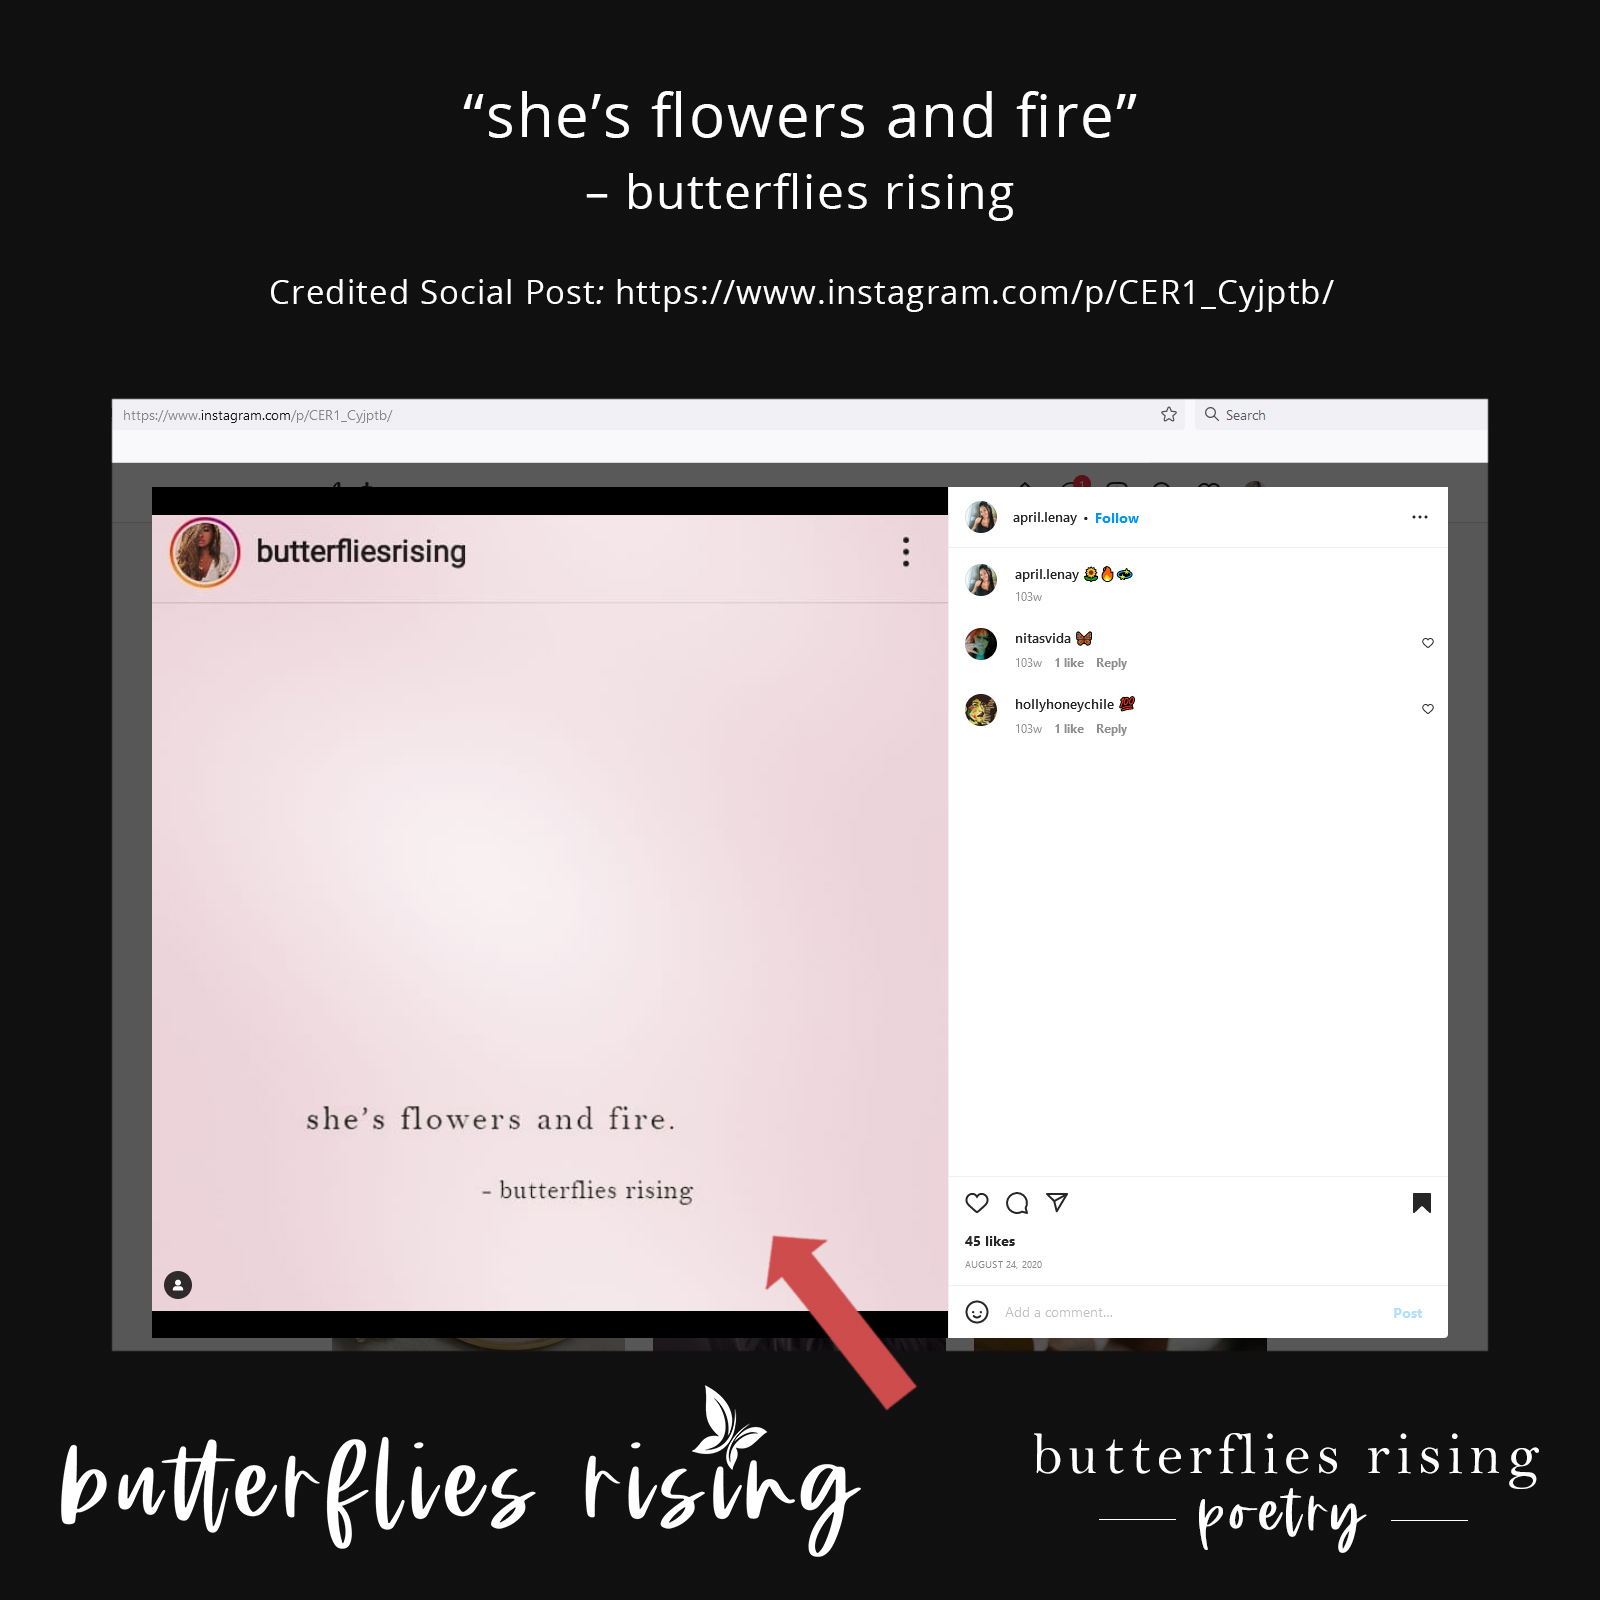 she’s flowers and fire - butterflies rising